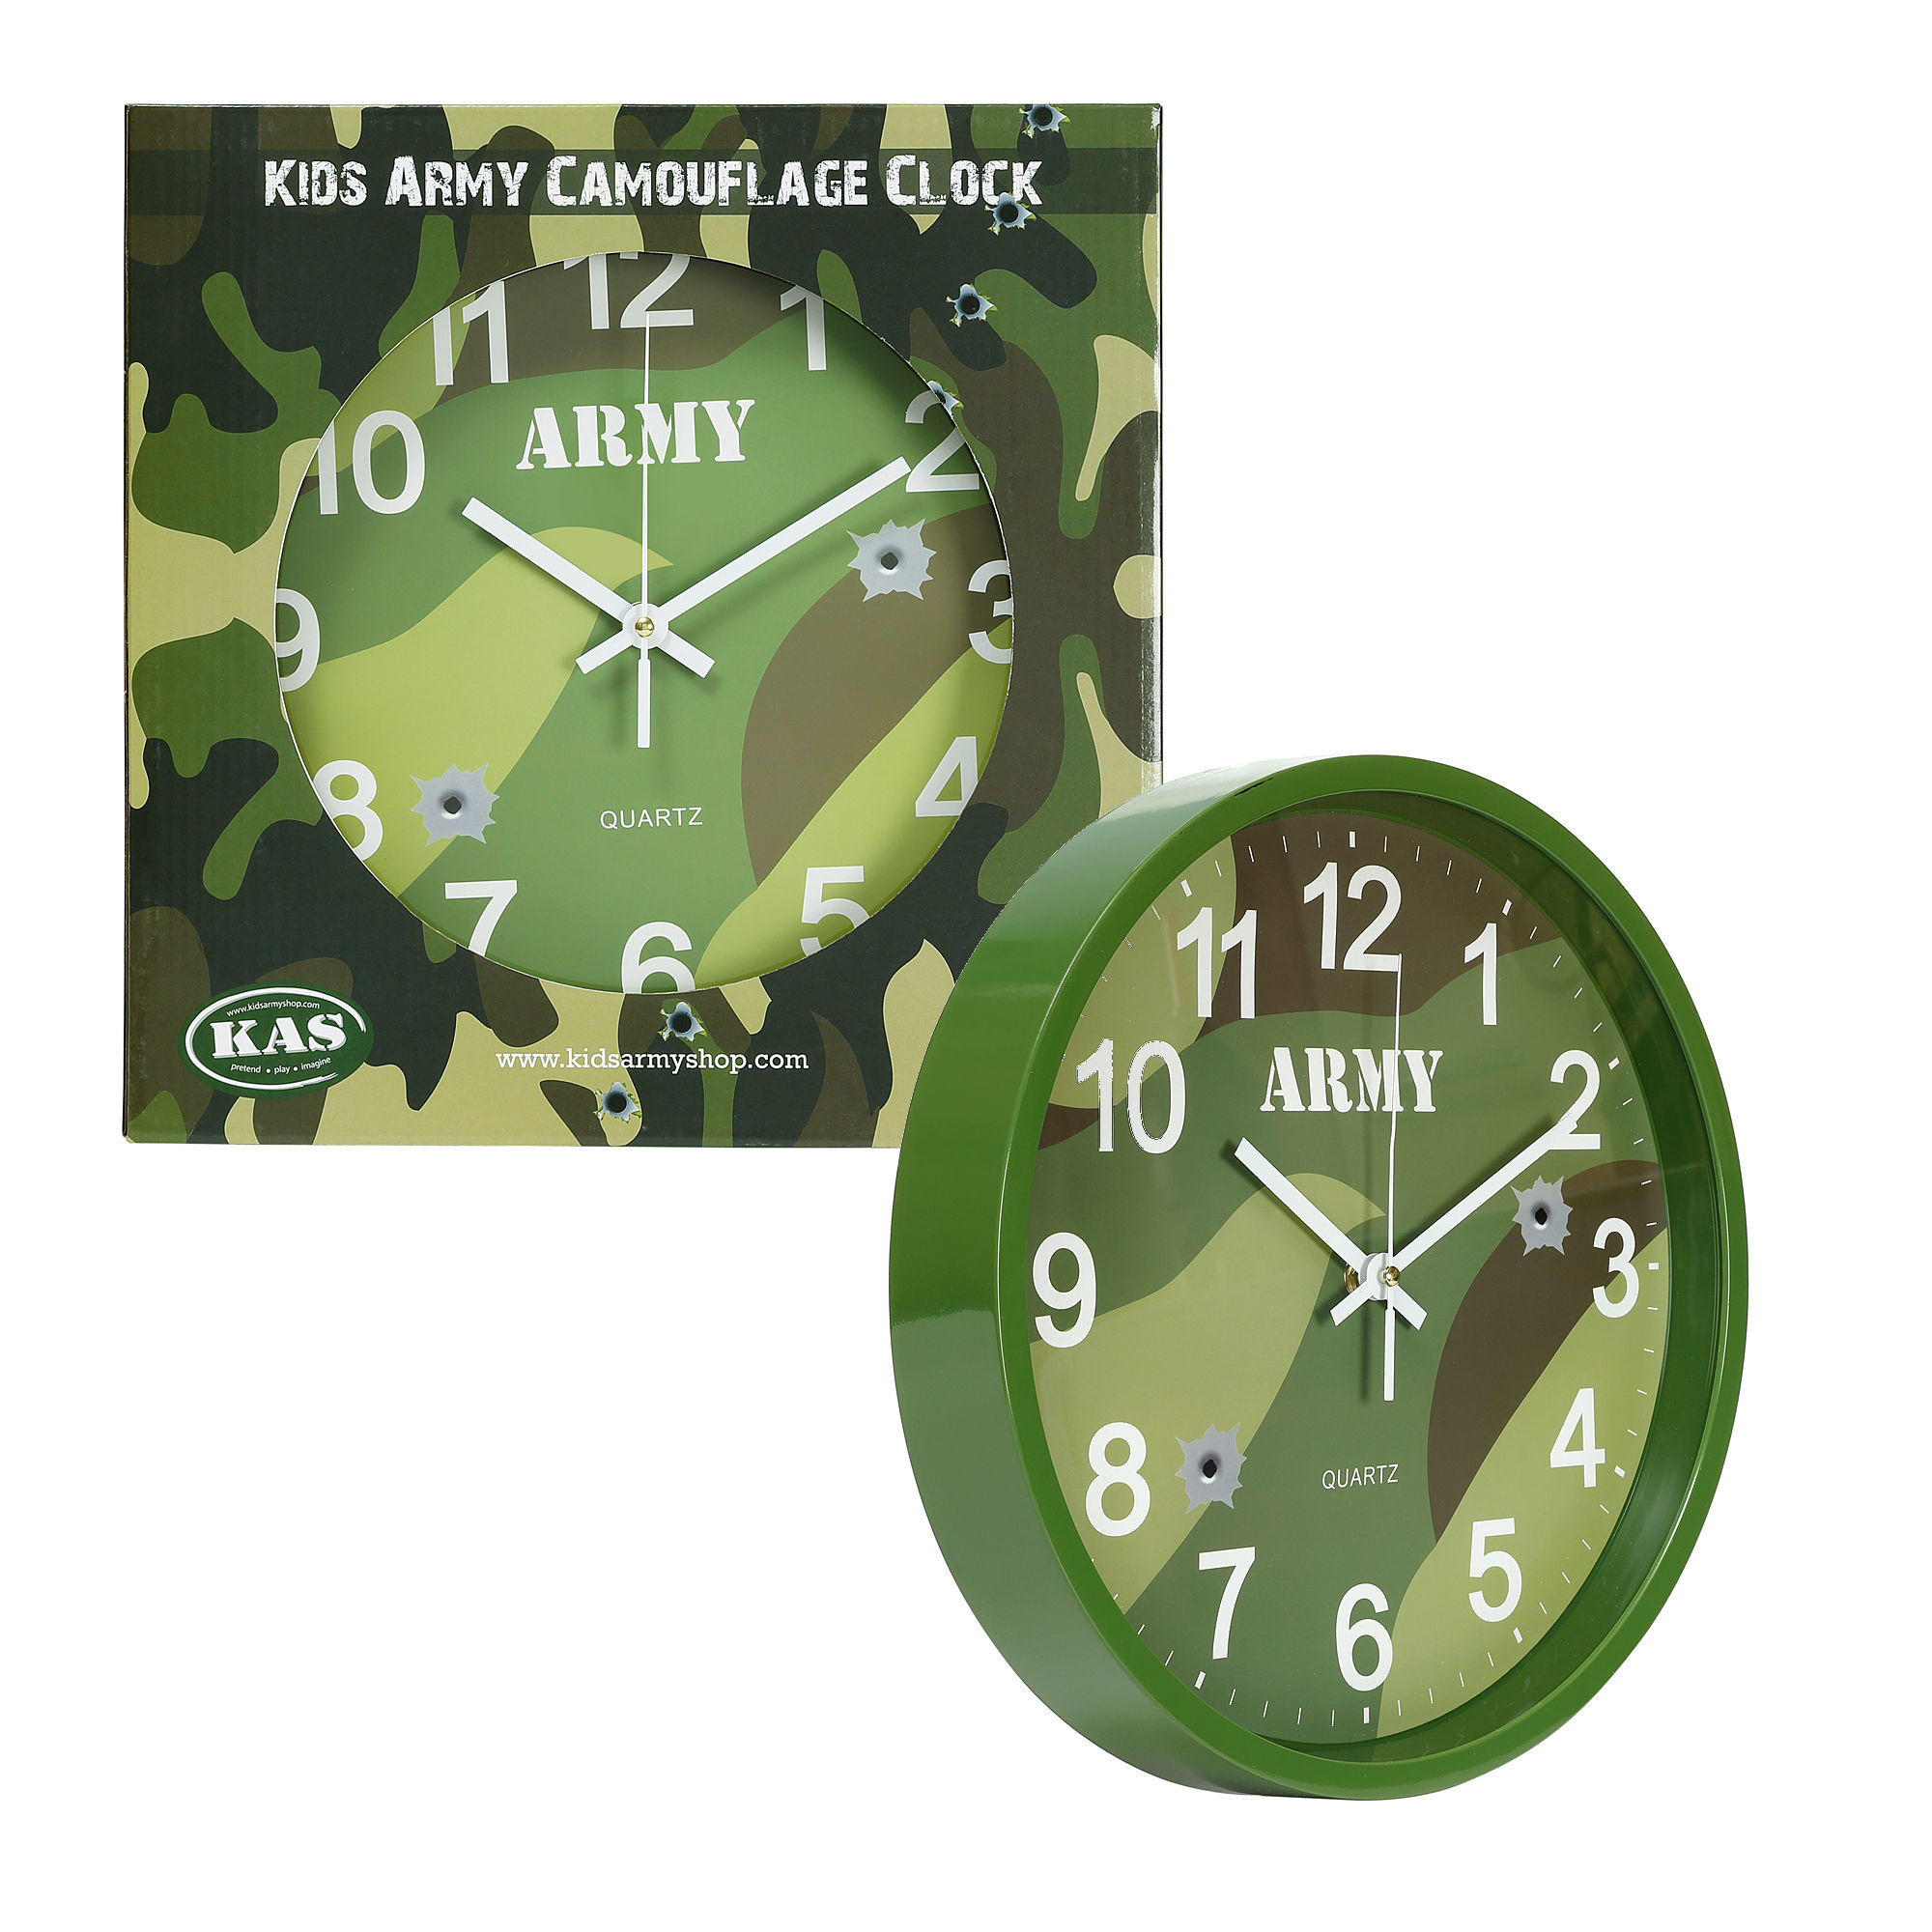 2000x2000 Army Camouflage Wall Clock